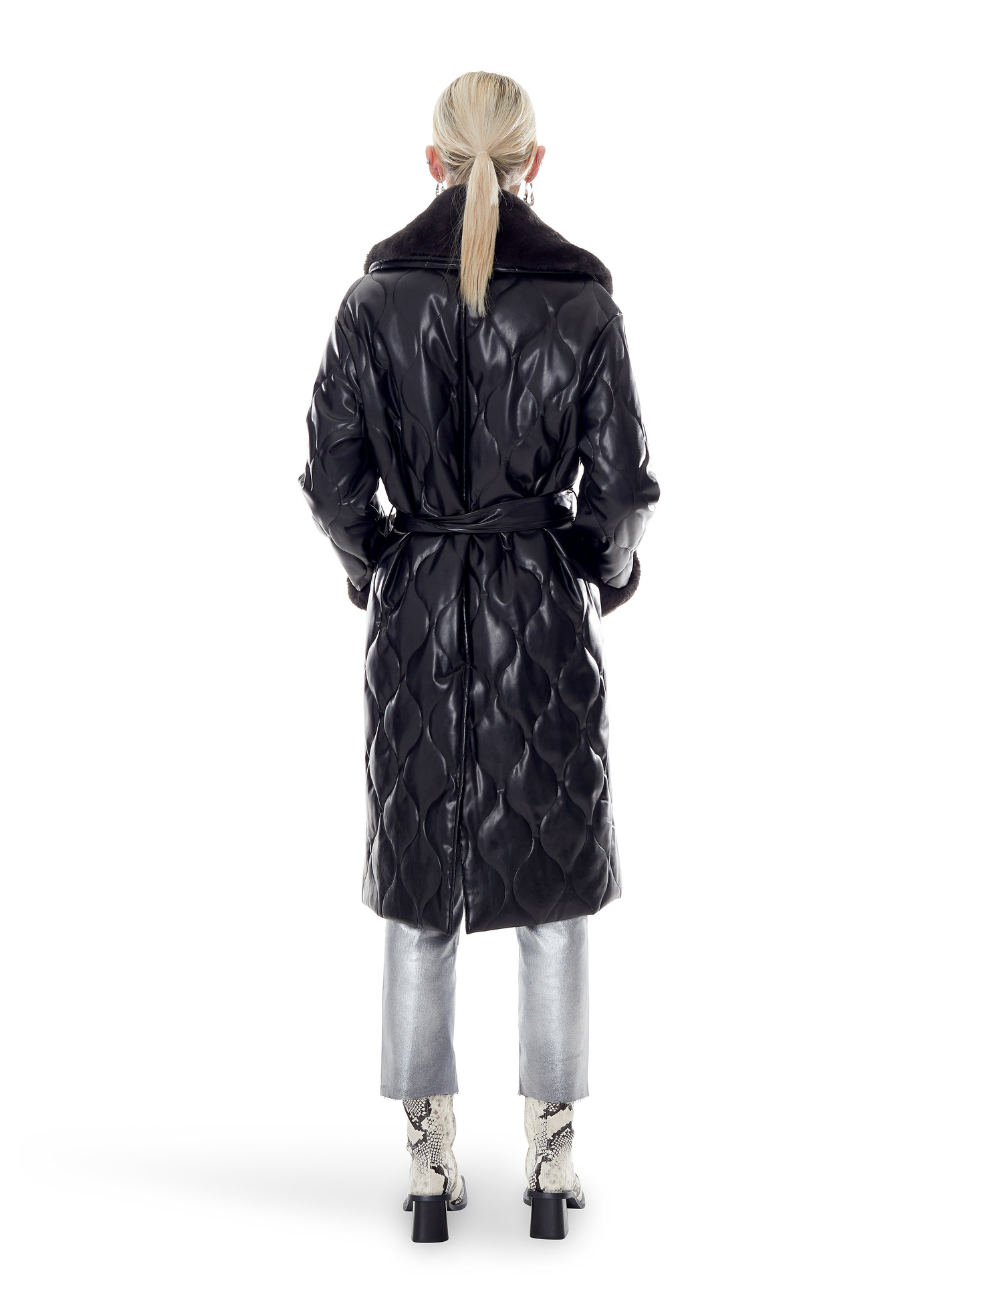 Carrie Stormi Matte Black Zero Waste Vegan Outerwear Faux Leather Fur Long Coat Quilted Sustainable